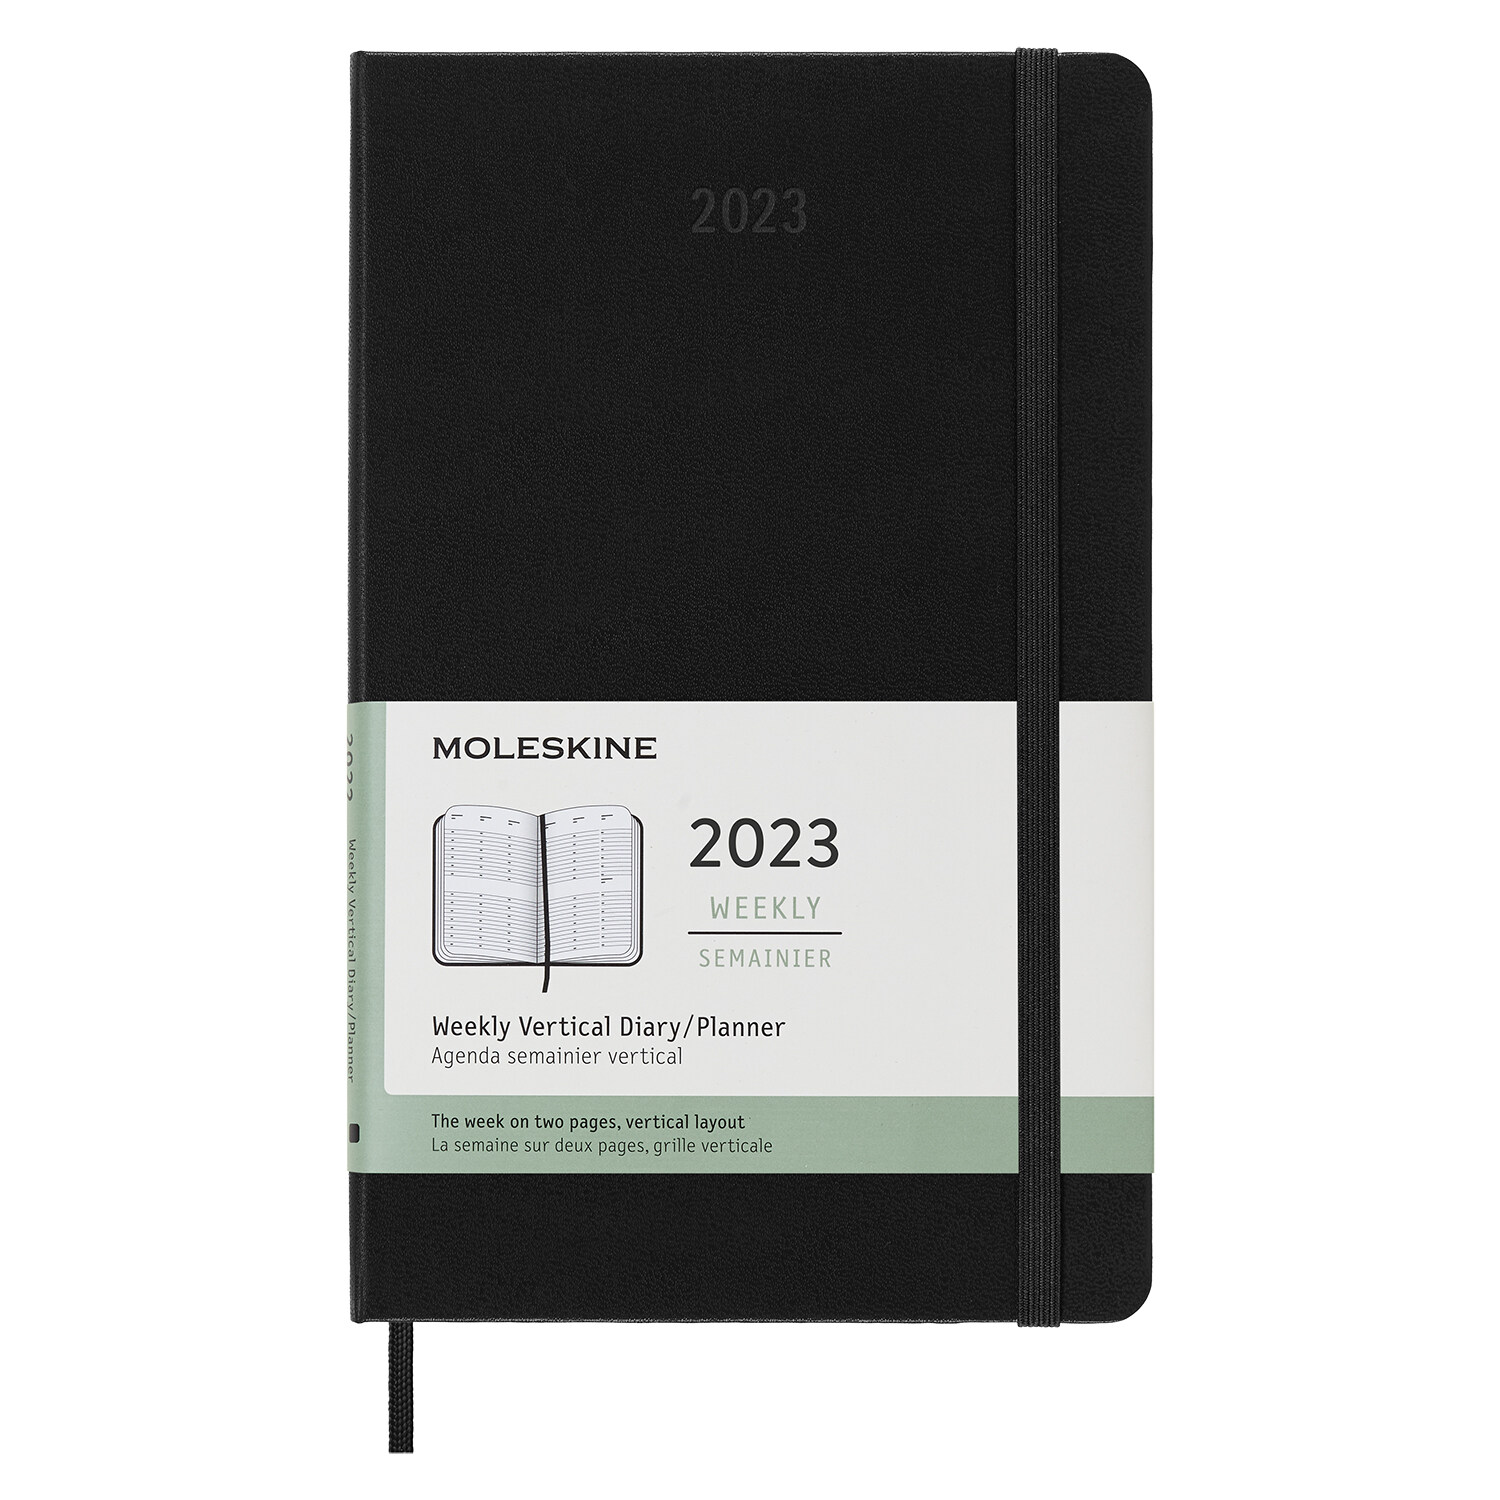 Moleskine 2023 Weekly Vertical Planner, 12m, Large, Black, Hard Cover (5 X 8.25) (Other)